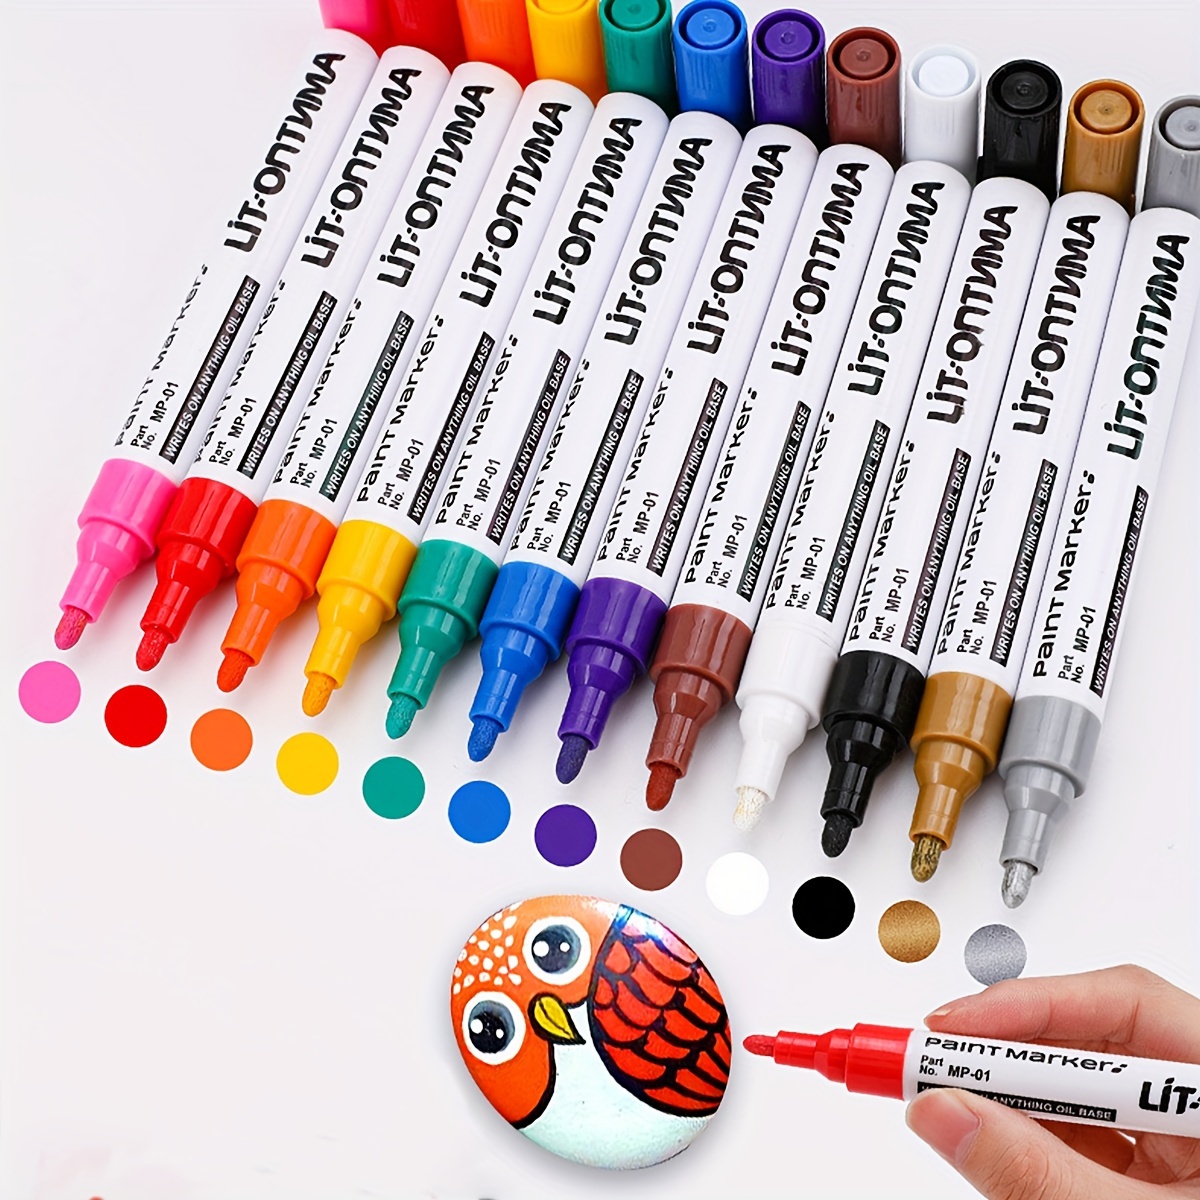 【HOT】 White Marker Pen Alcohol Paint Oily Waterproof Tire Painting Graffiti  Pens Permanent Gel Pen For Fabric Wood Leather Marker